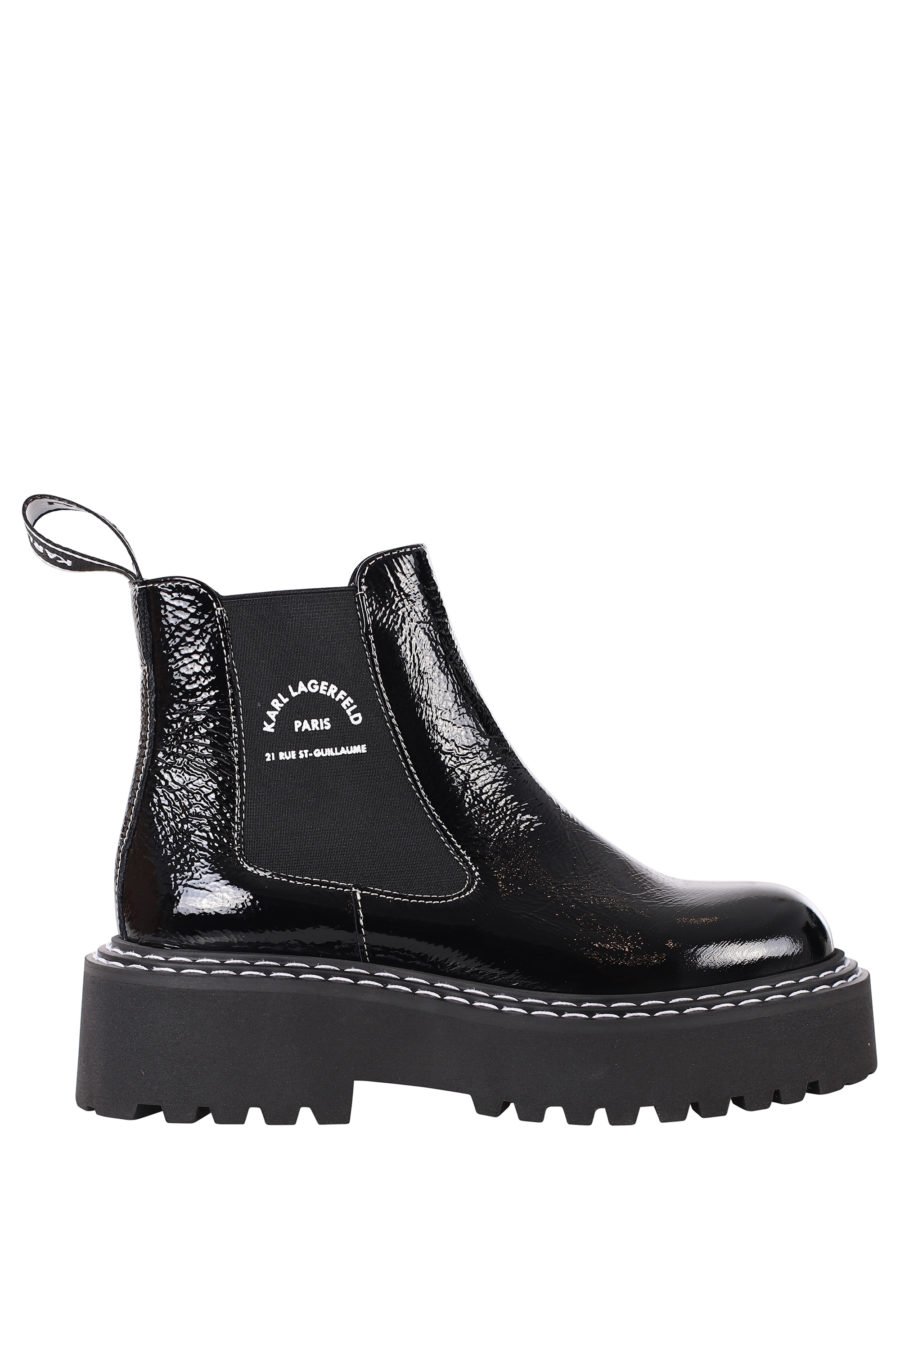 Black ankle boots with platform and small logo - IMG 0430